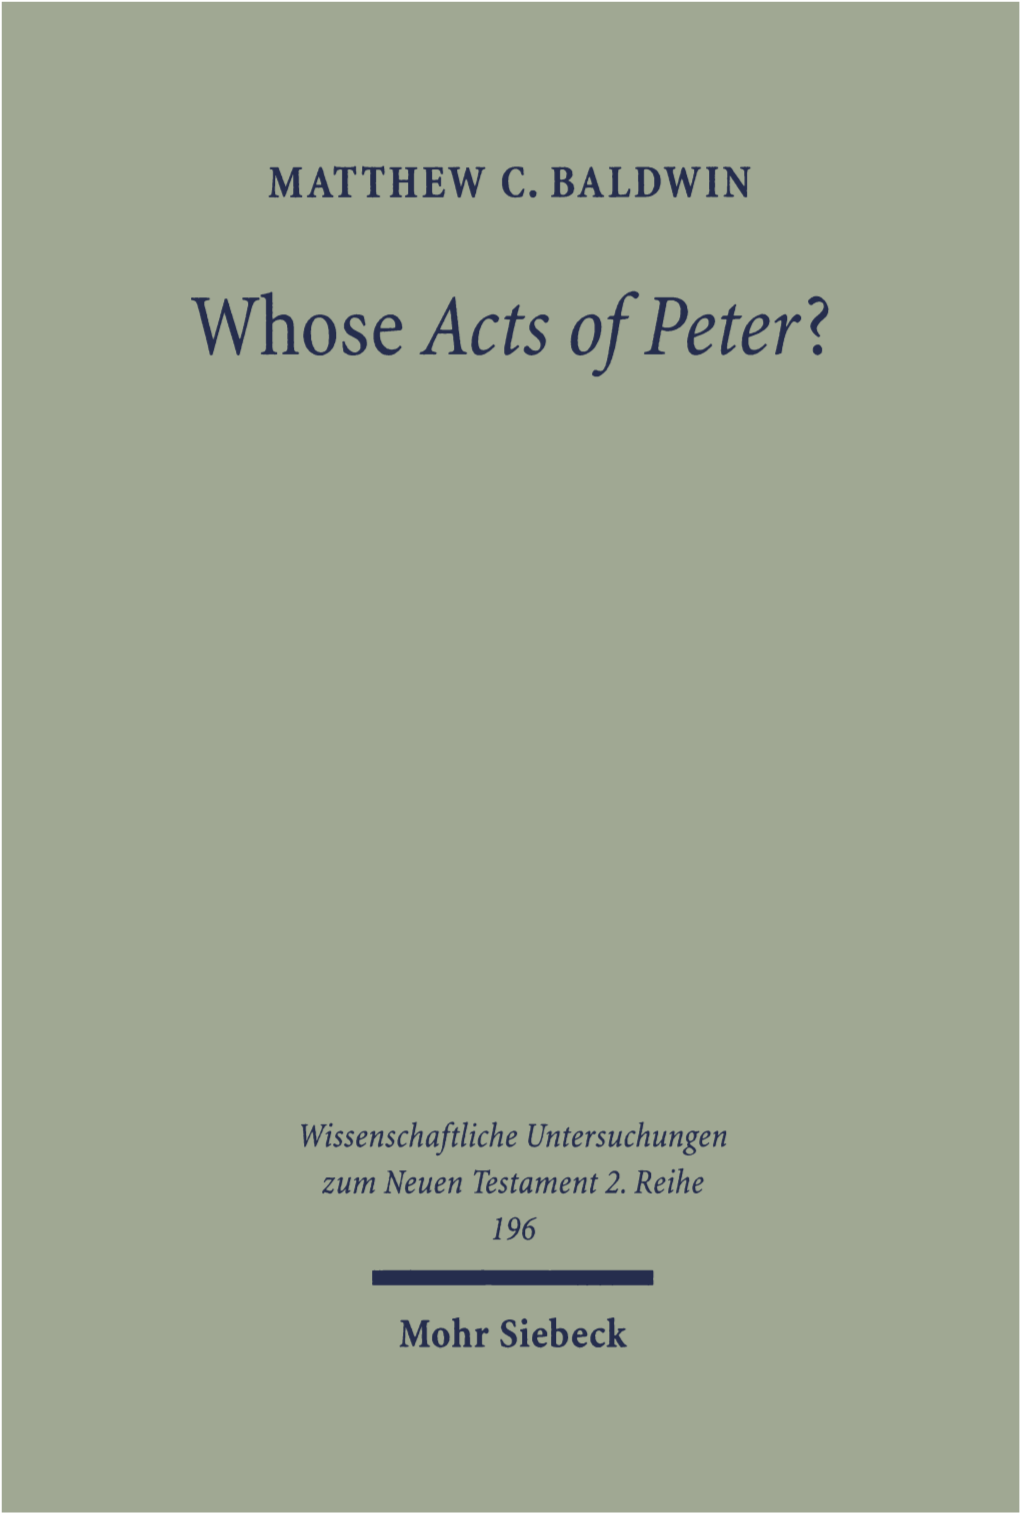 Whose Acts of Peter?